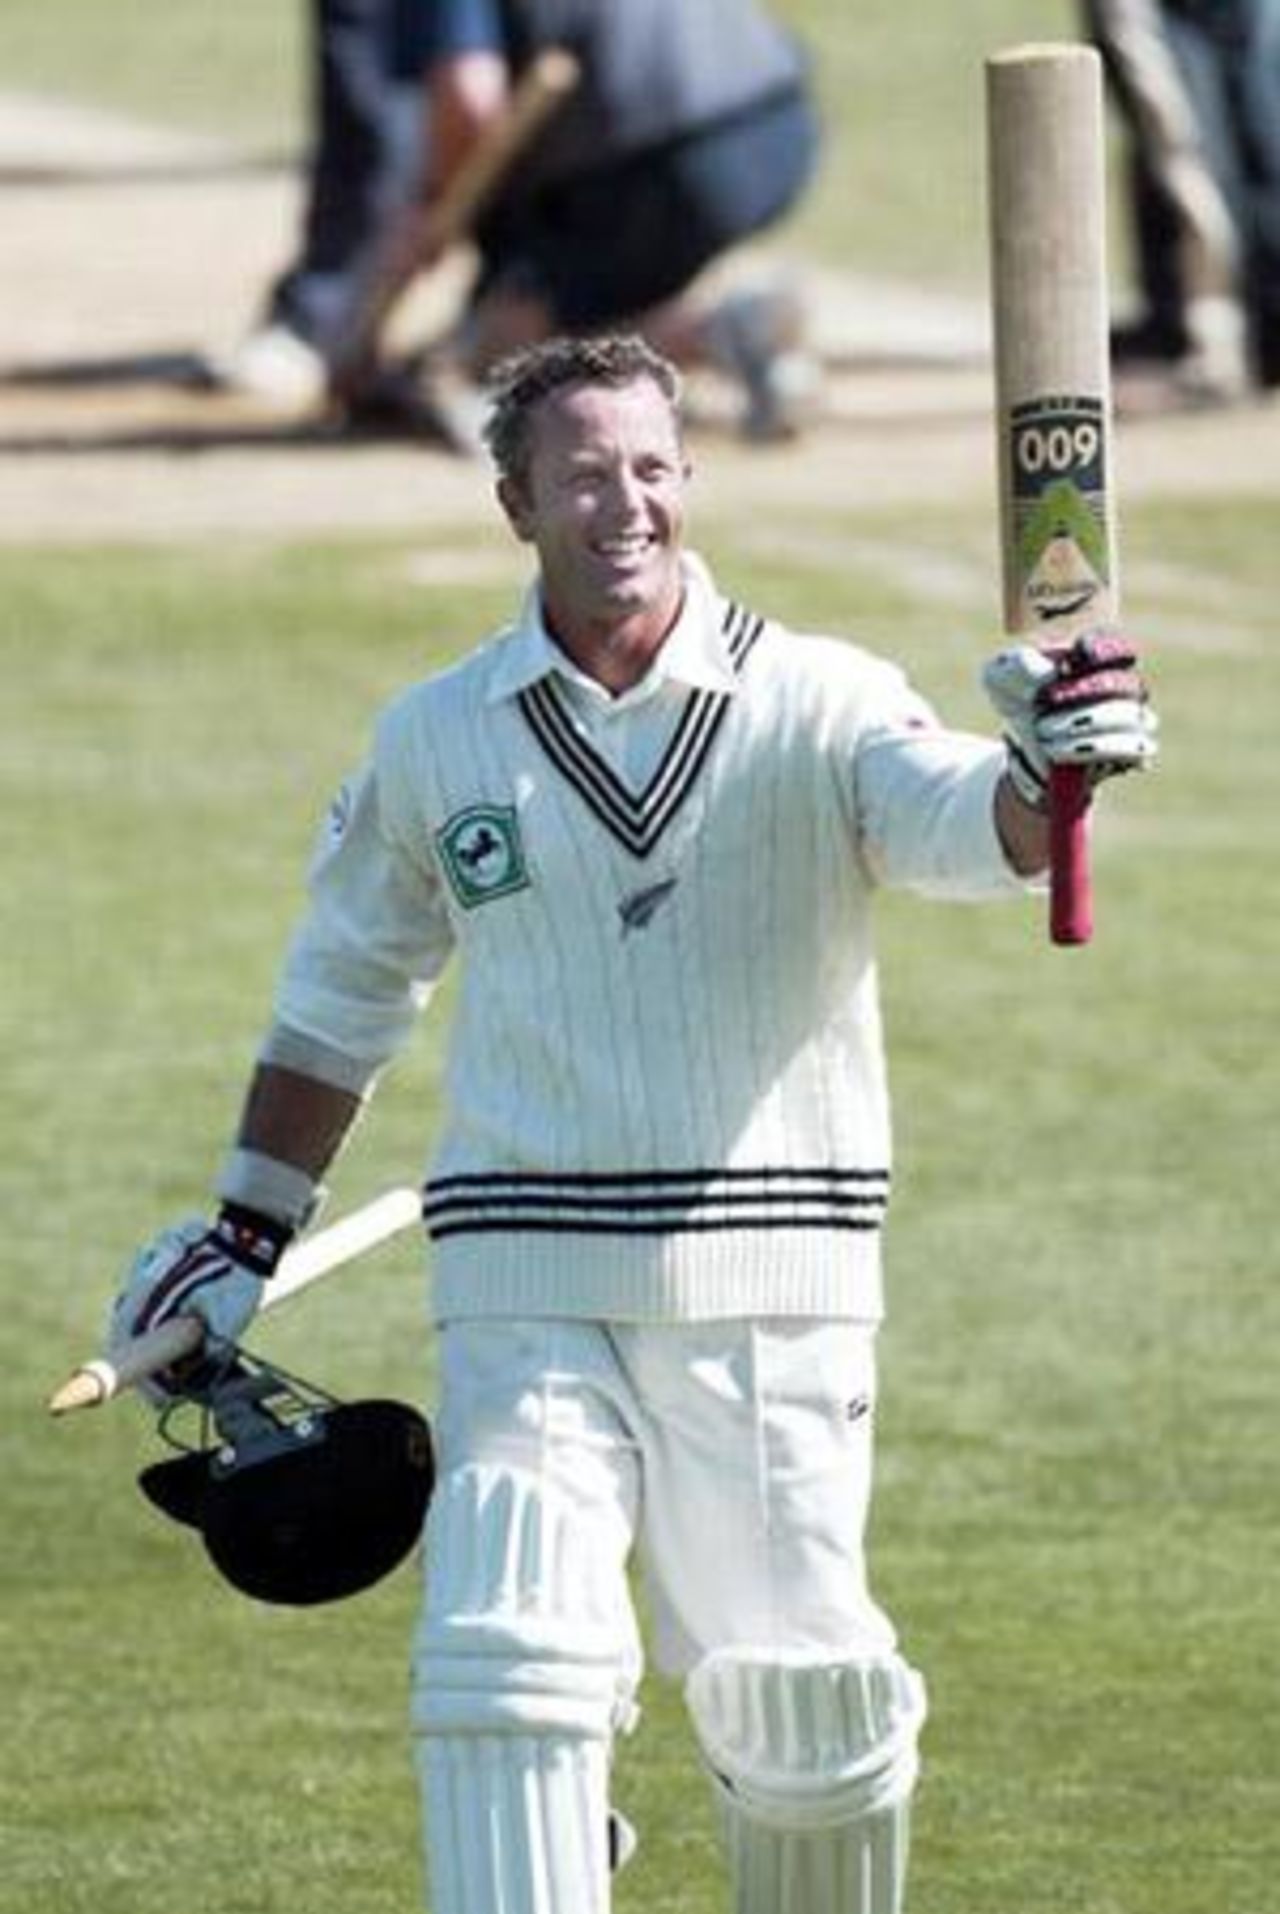 New Zealand batsman Mark Richardson raises his bat to acknowledge the crowd as he leaves the field after New Zealand won the match, beating India by 10 wickets. Richardson scored 14 not out in his second innings and hit the winning runs. 1st Test: New Zealand v India at Basin Reserve, Wellington, 12-16 December 2002 (14 December 2002).